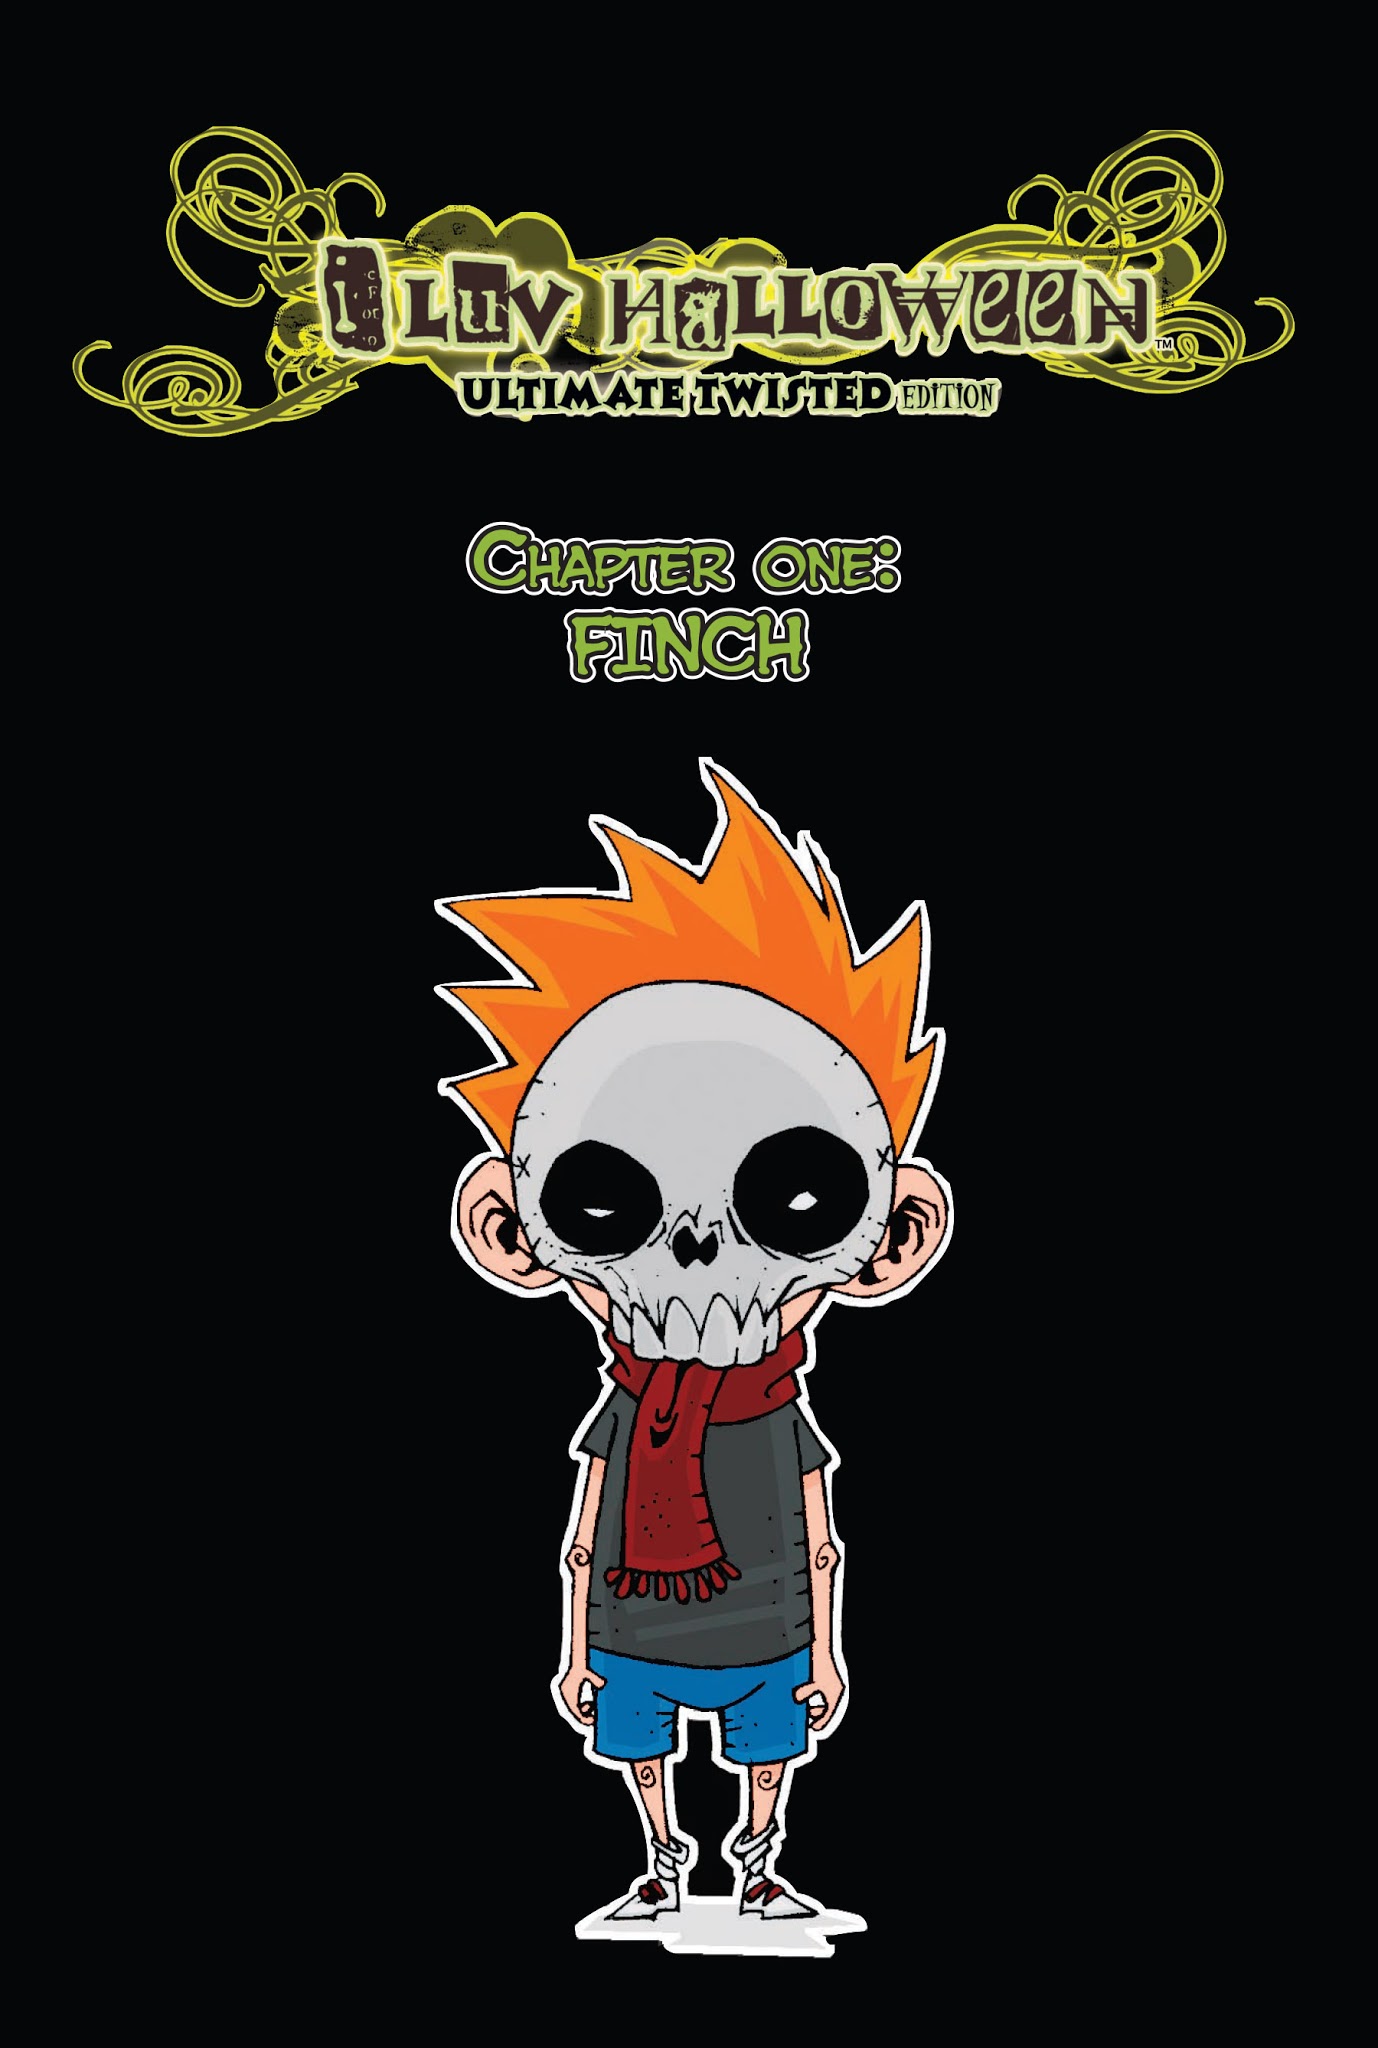 Read online I Luv Halloween comic -  Issue # TPB 1 - 7